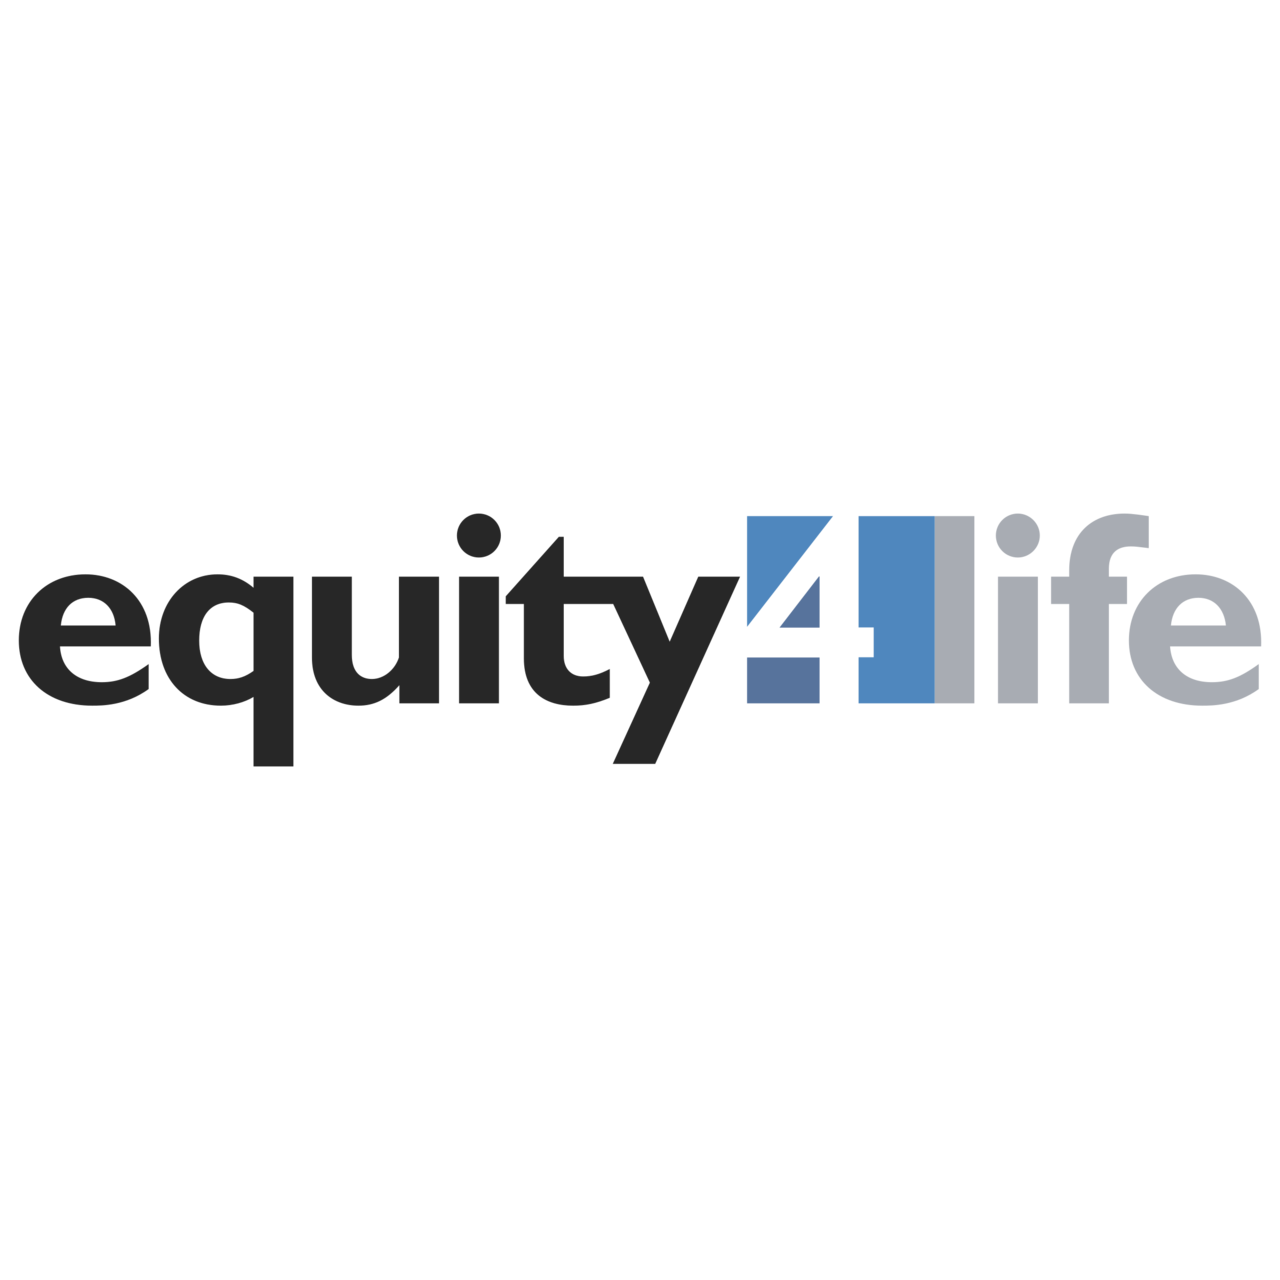 Equity Life